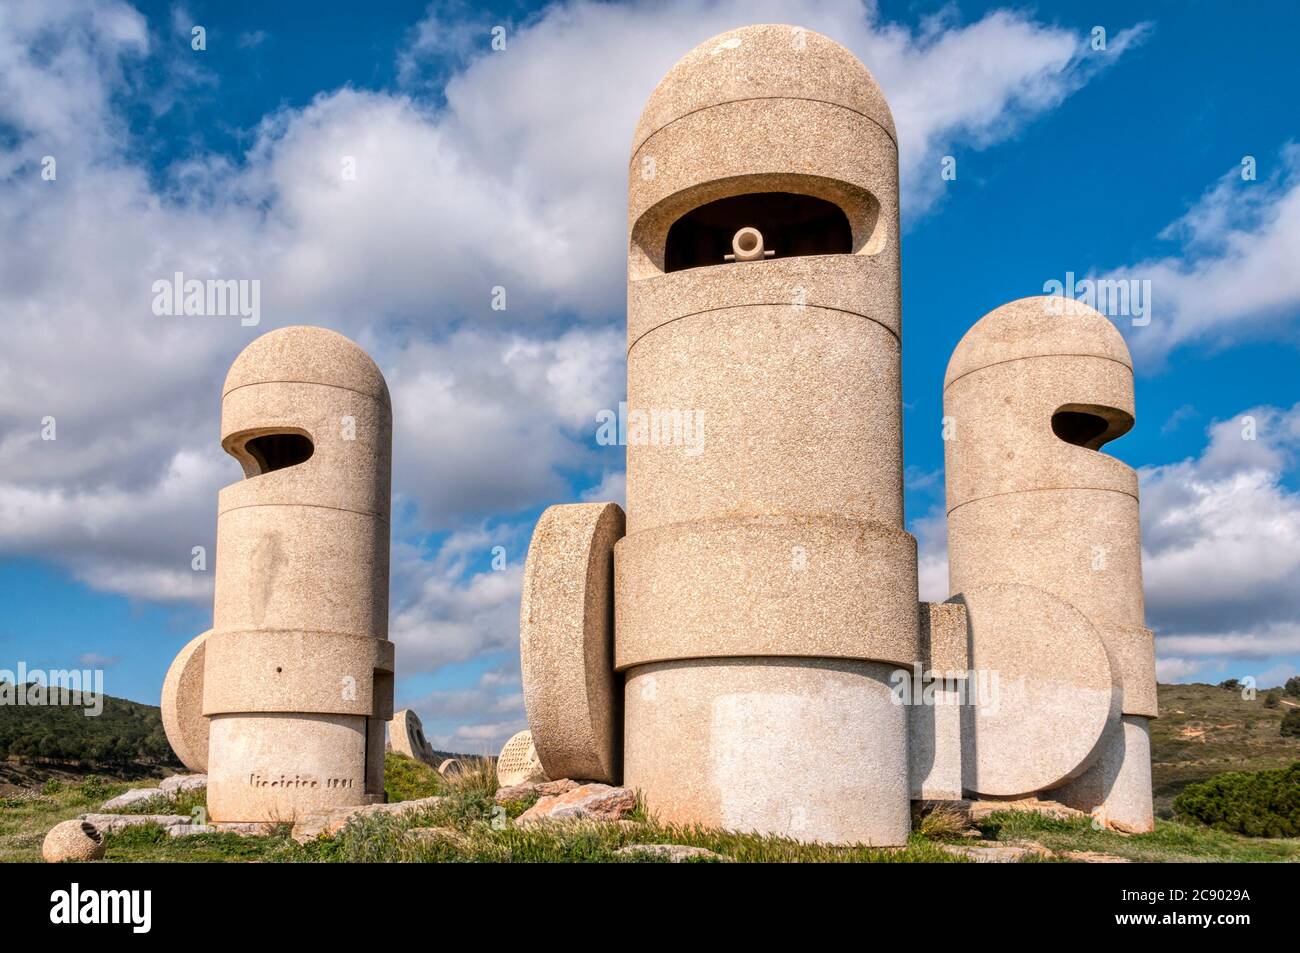 The Cathar Knights is a cement sculpture by Jacques Tissinier above the A61 autoroute at the Aire De Peche Loubat service area in the Aude department. Stock Photo